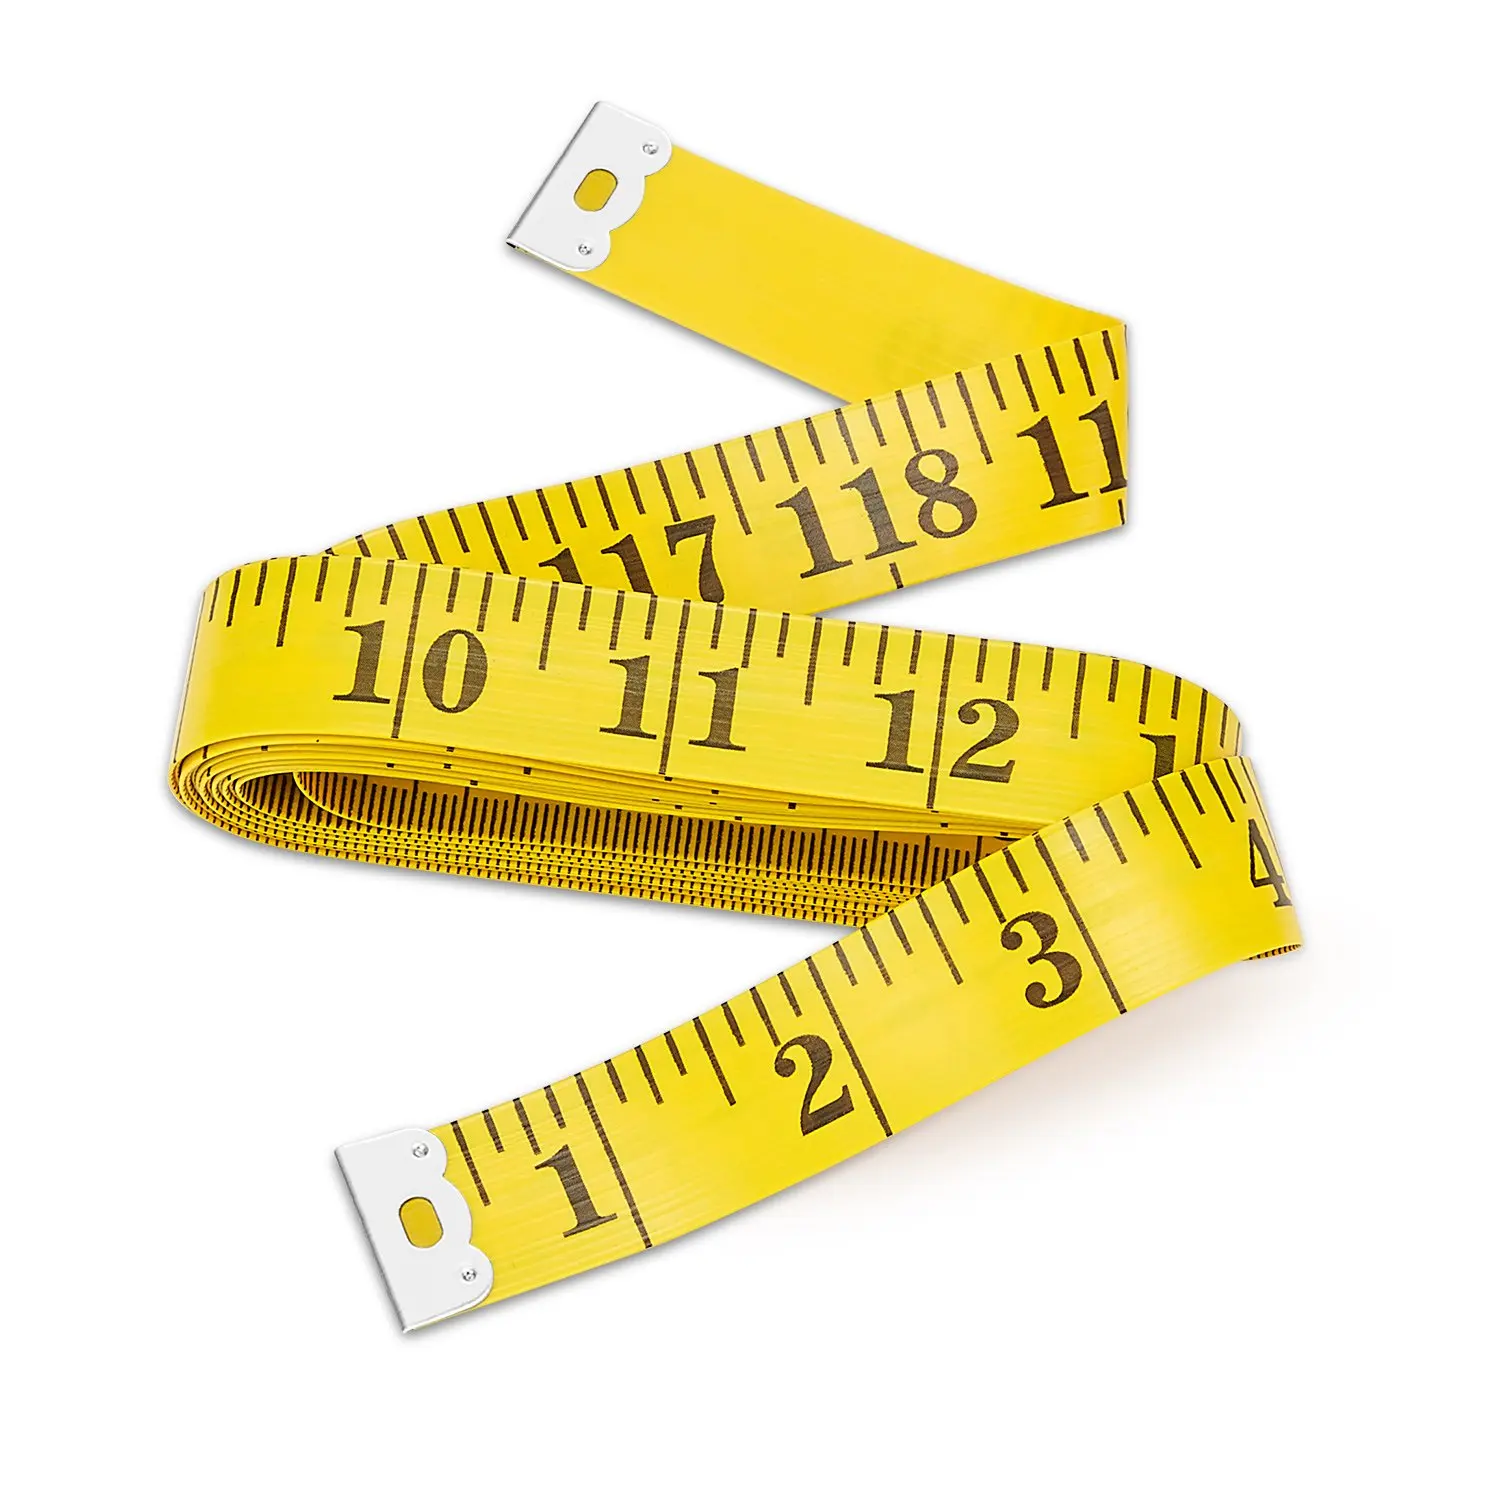 cheap-printable-scale-ruler-inches-find-printable-scale-ruler-inches